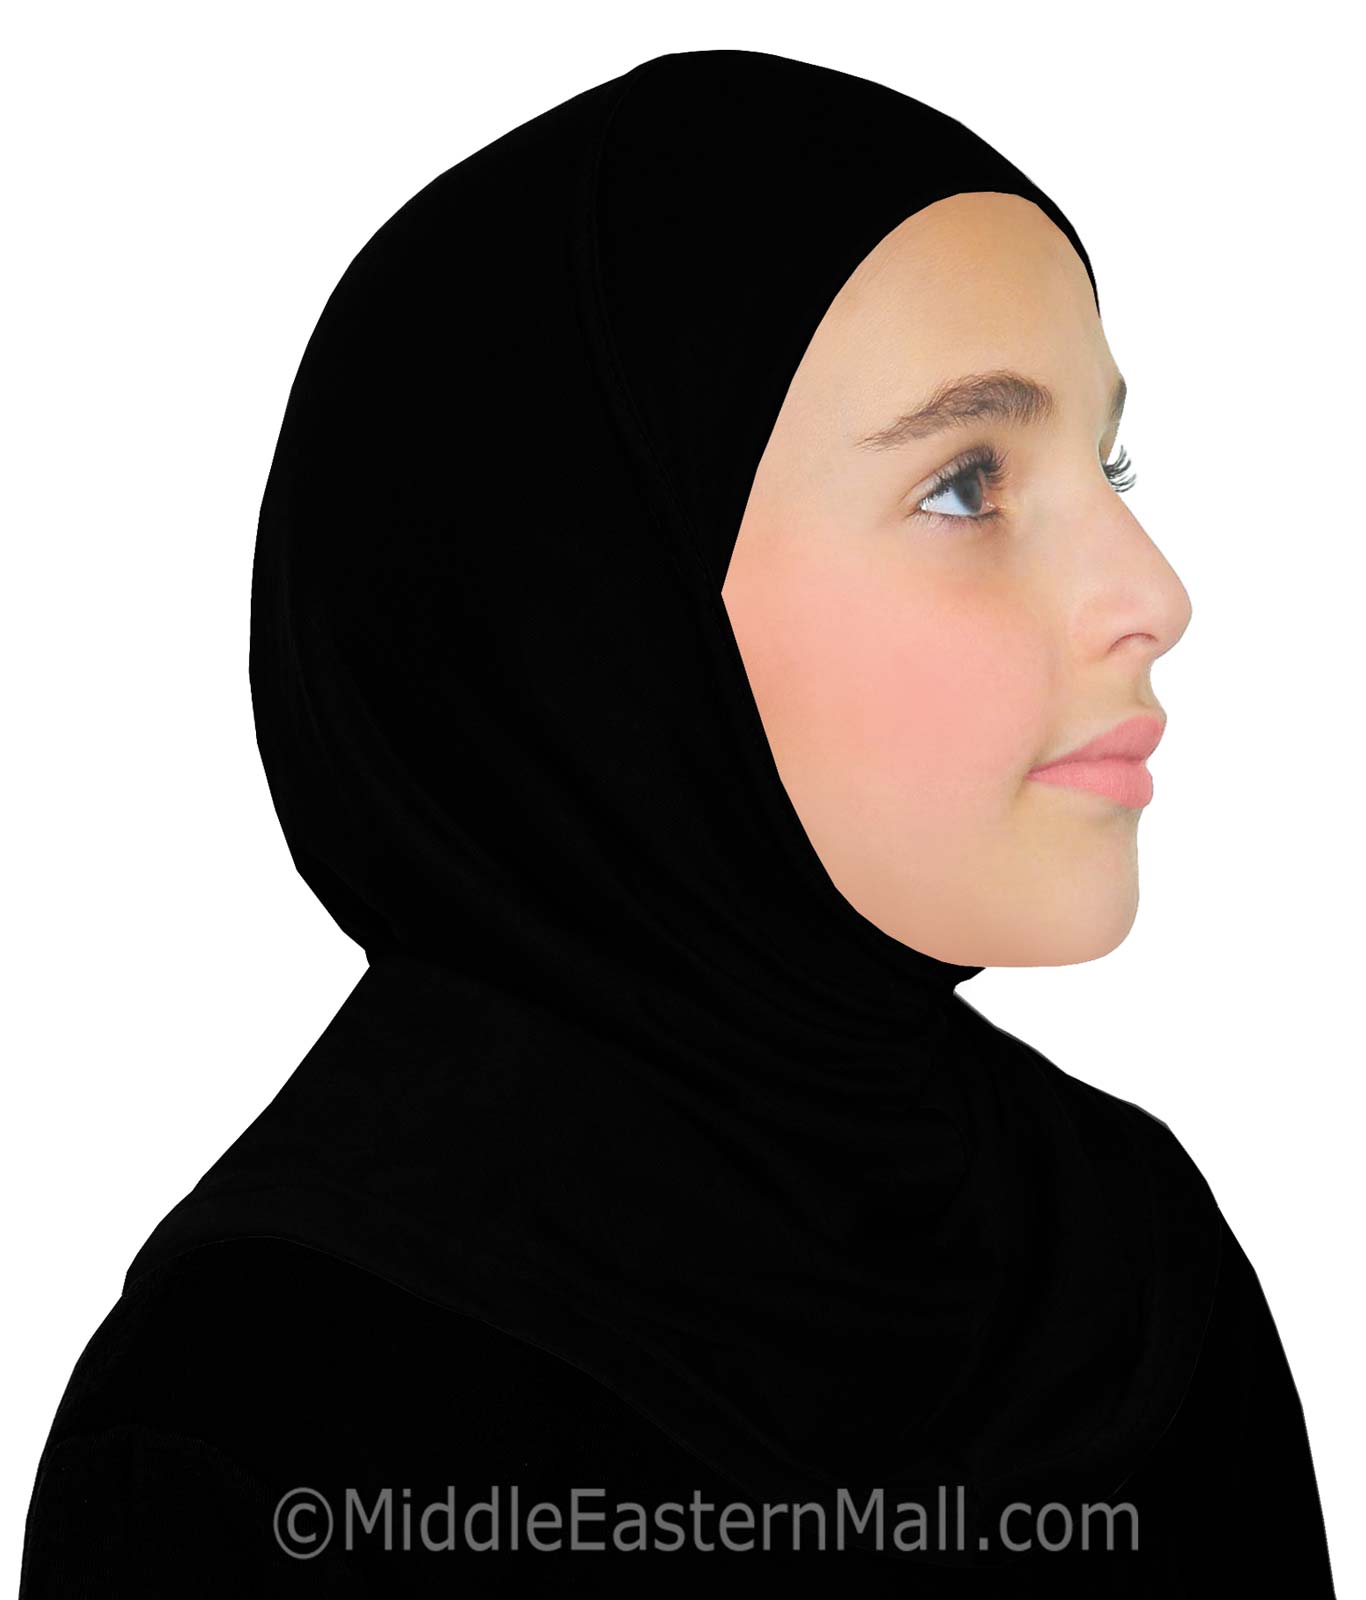 SMALL Girl's Amira Hijab one piece Cotton Pull On Headscarf UP TO 6 YEARS OLD